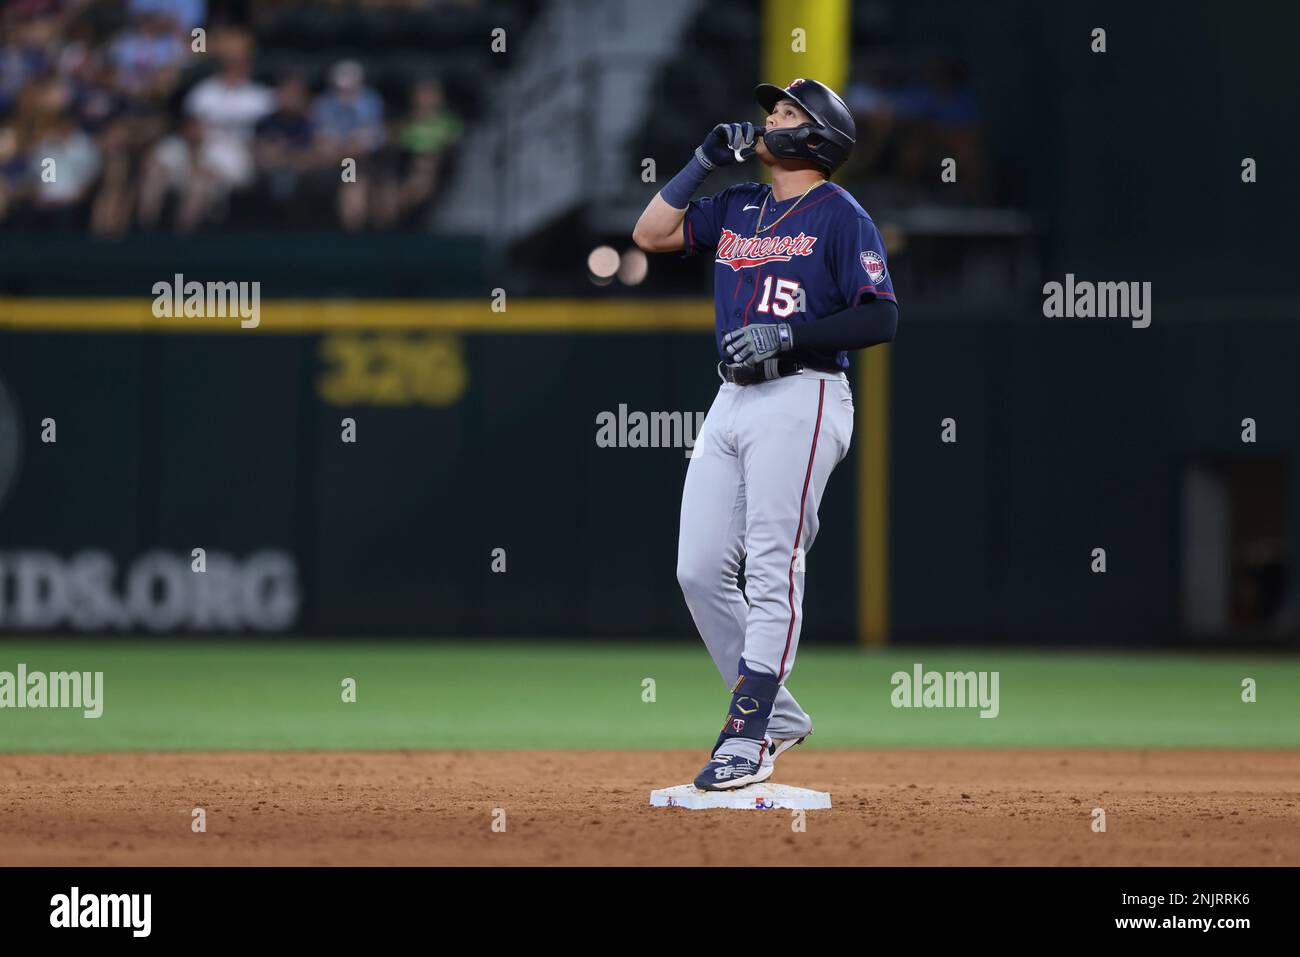 ARLINGTON, TX - JULY 09: Minnesota Twins relief pitcher Jhoan Duran (59)  pitches in the game between the Texas Rangers and the Minnesota Twins on  July 9, 2022 at Globe Life Field